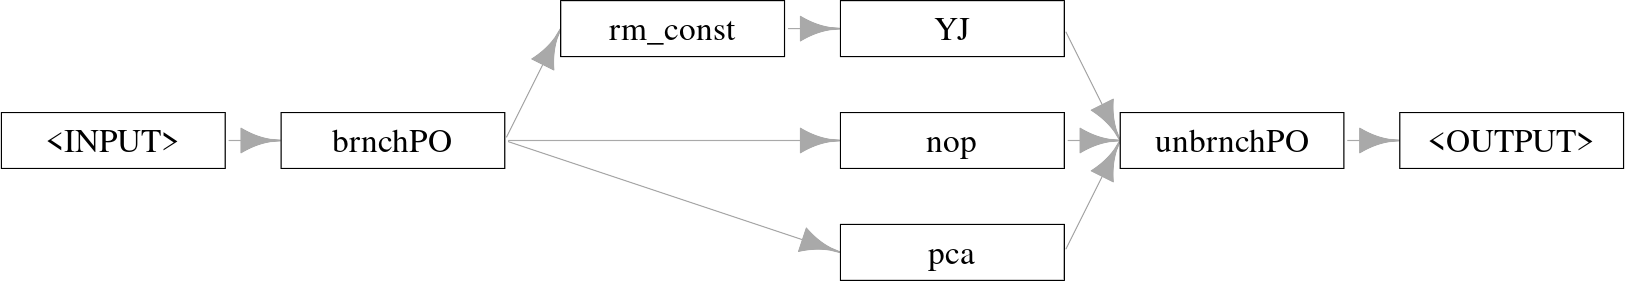 Graph starting with "<INPUT> -> brnchPO" which has three arrows to "removeconstants -> yeojohnson", "nop", and "pca", which all then point to "unbrnchPO -> <OUTPUT>".